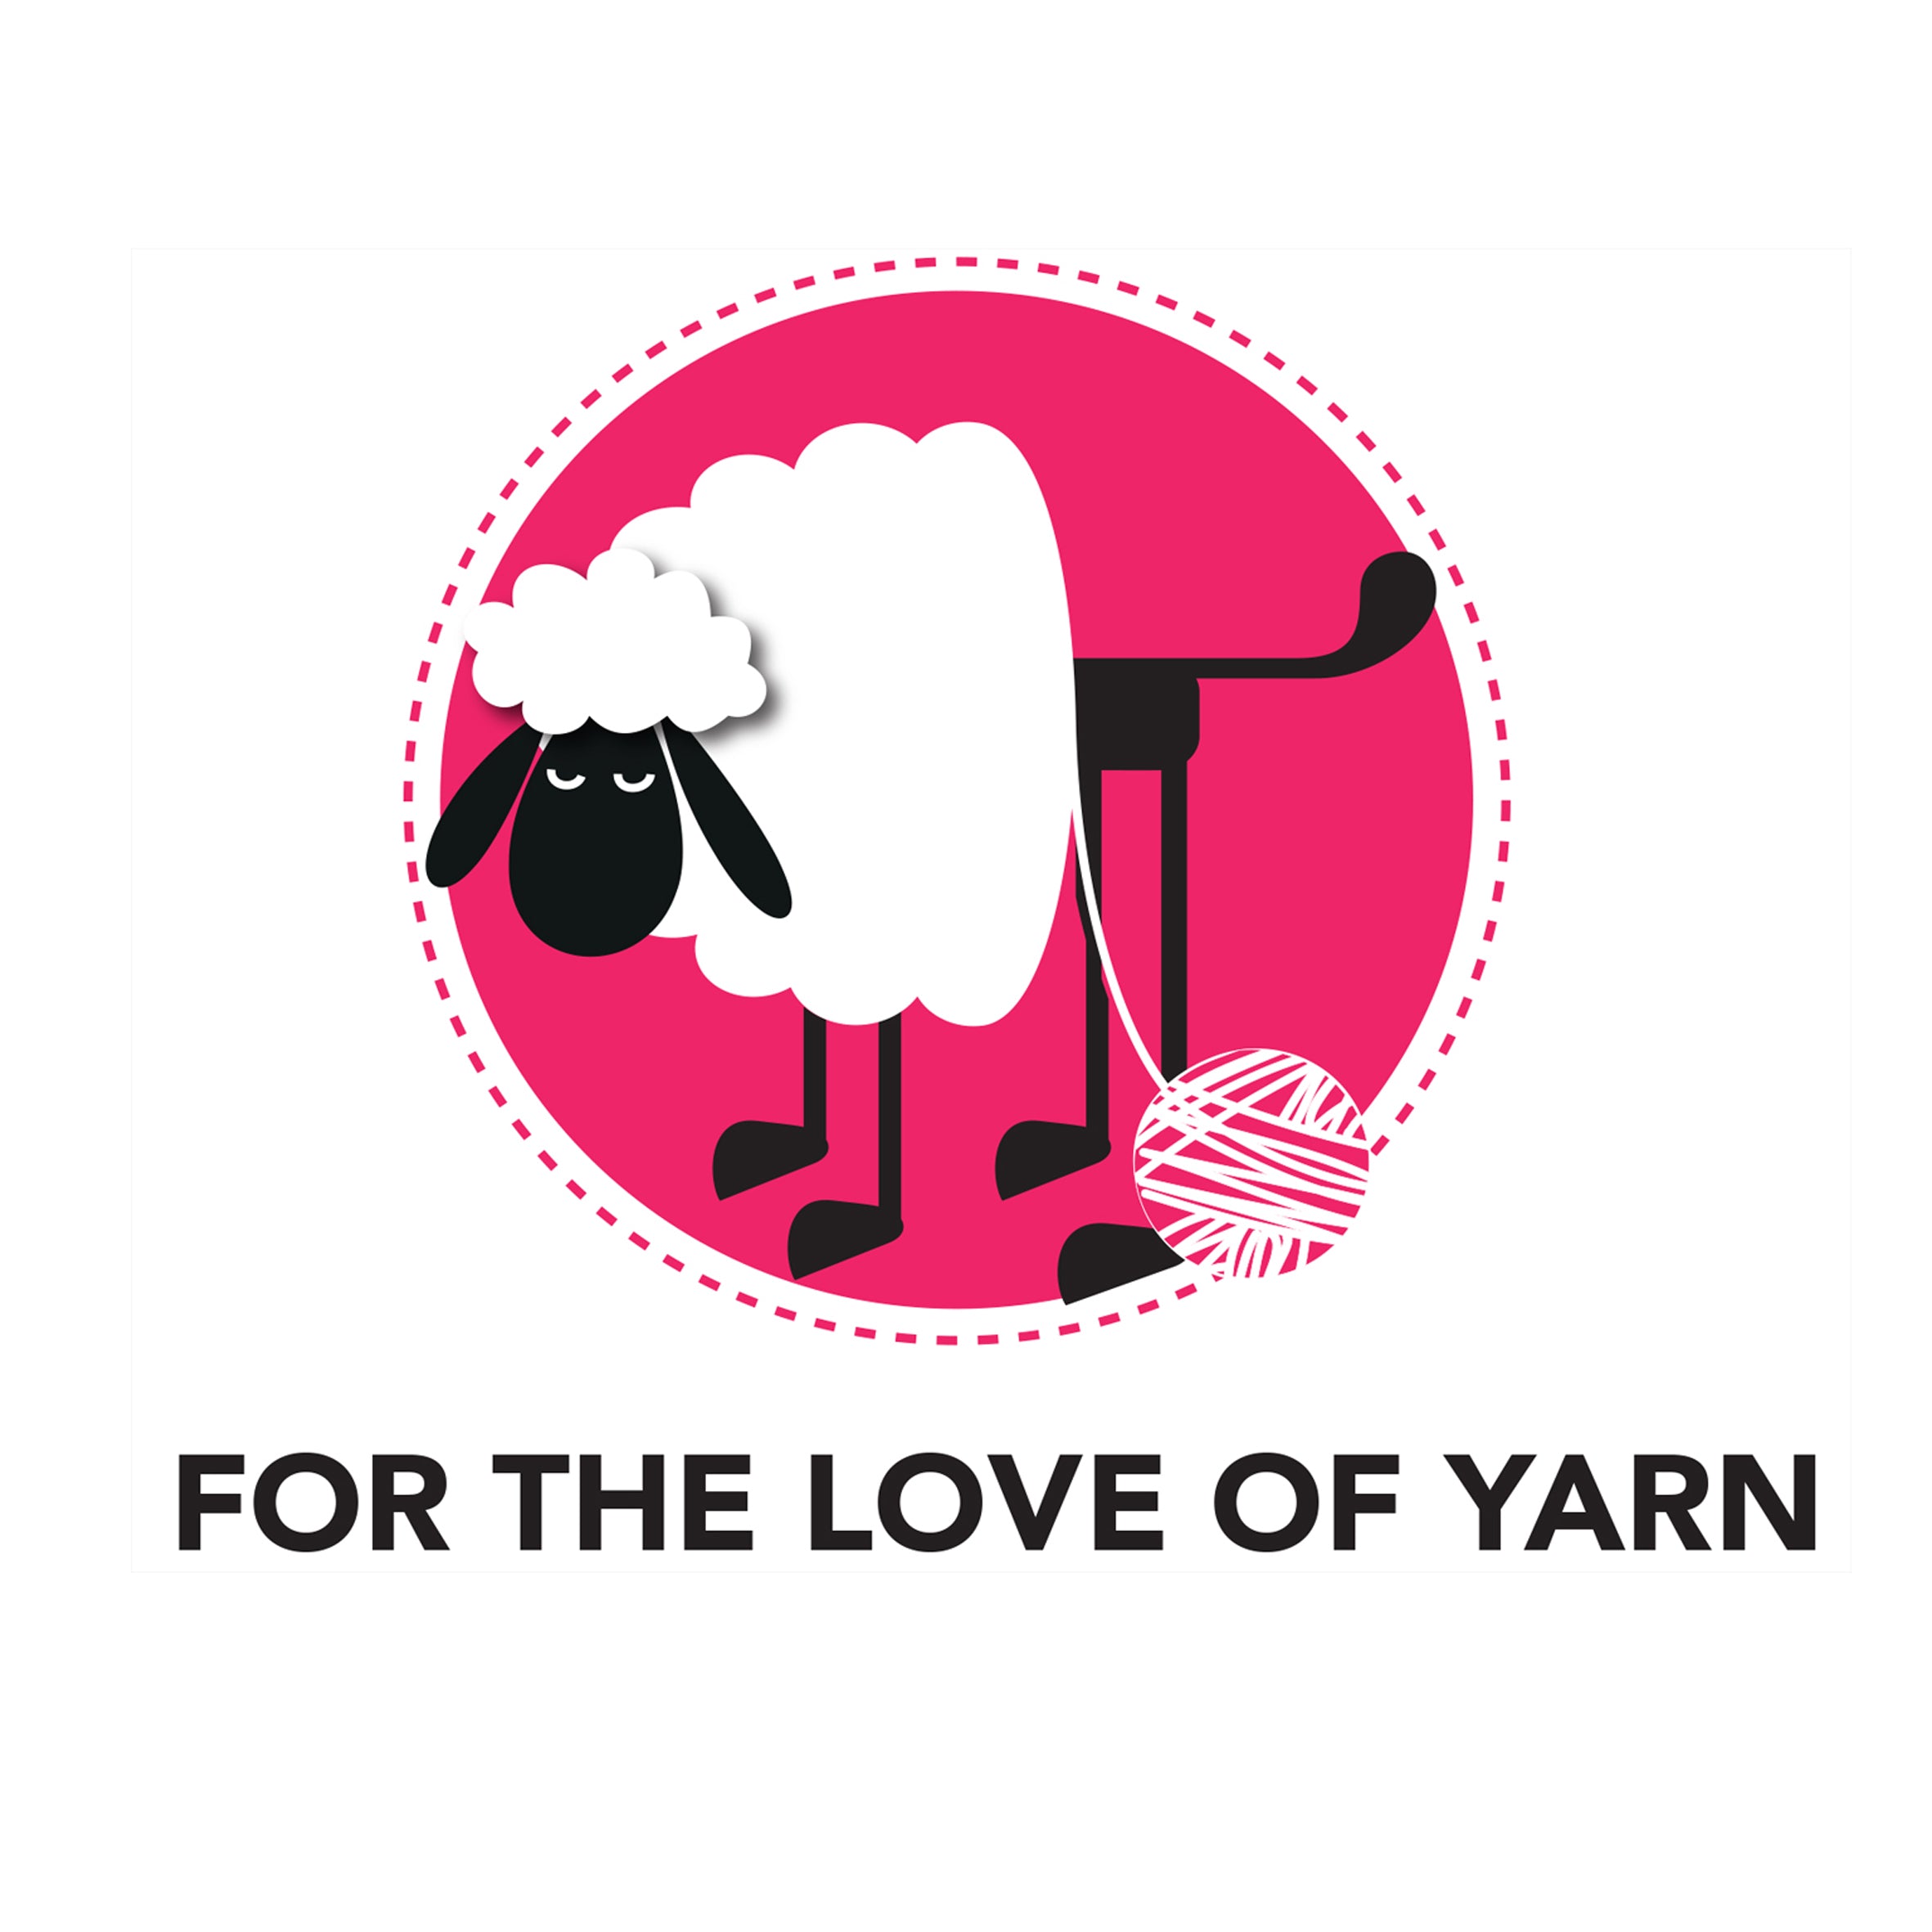 For the love of yarn clubs